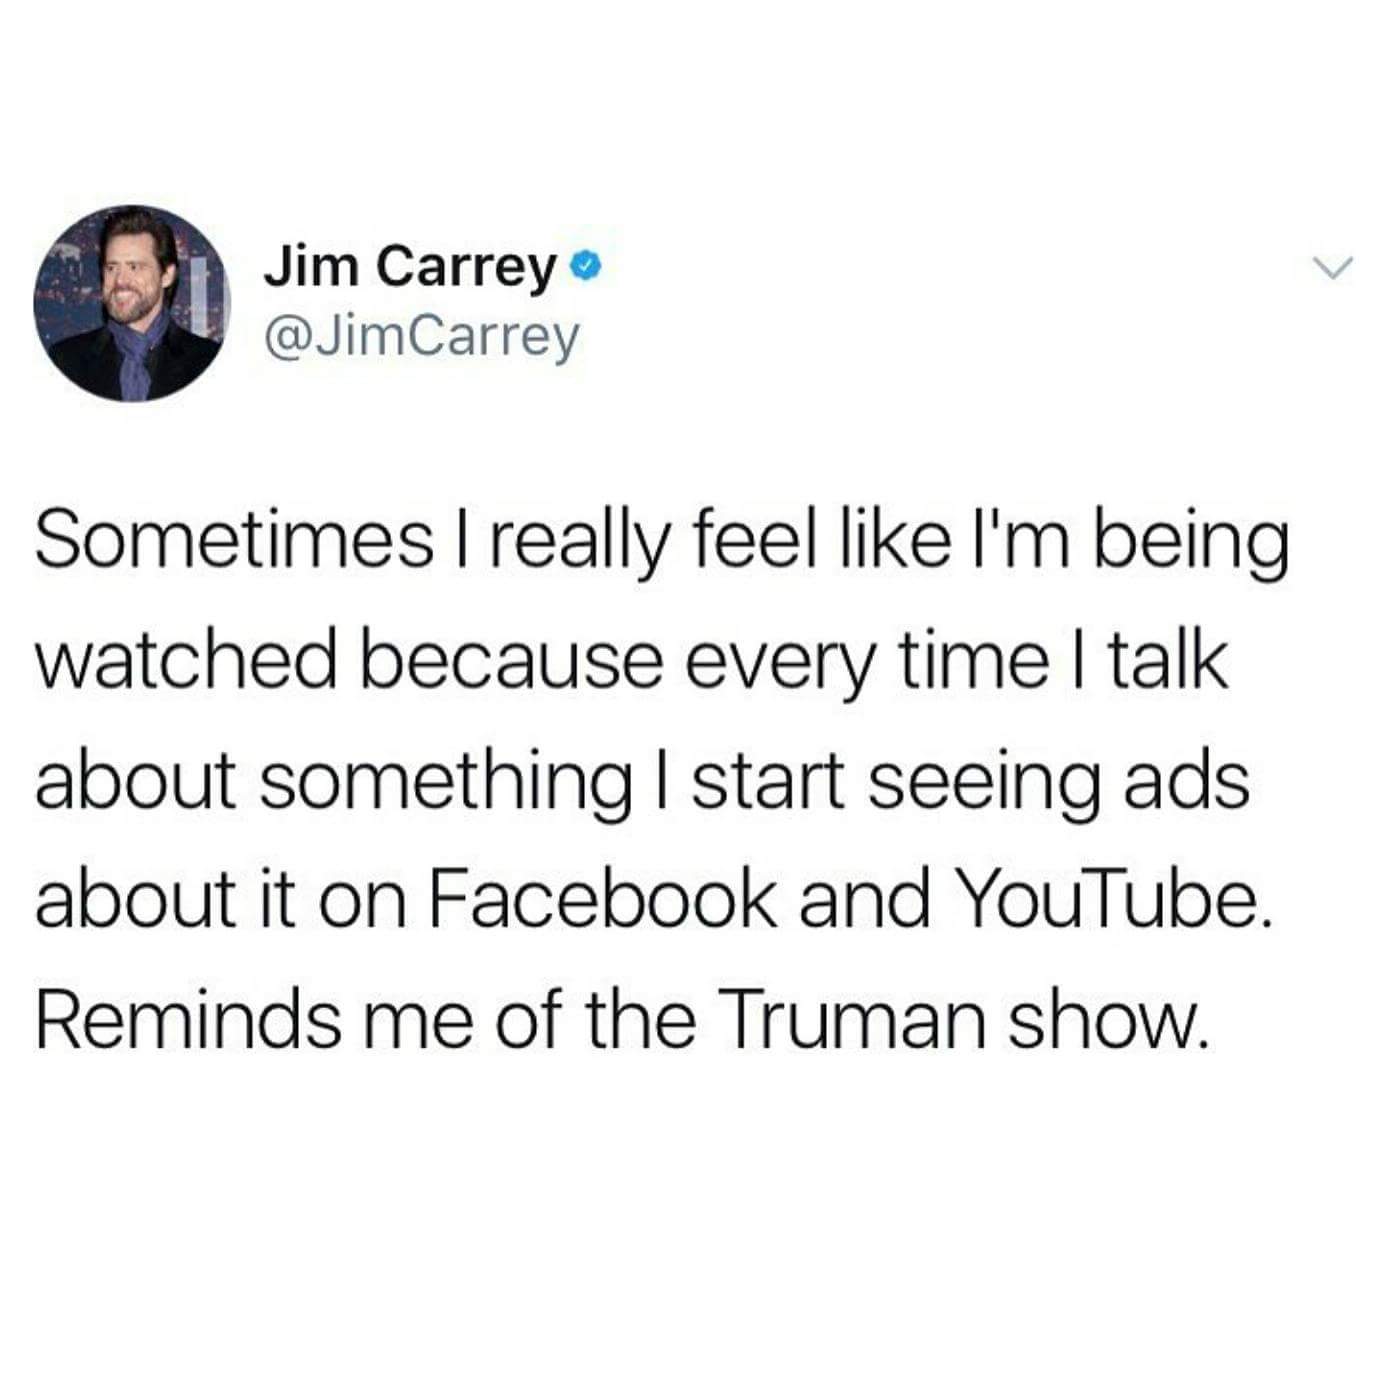 bachelorette tinder meme - Jim Carrey Carrey Sometimes I really feel I'm being watched because every time I talk about something I start seeing ads about it on Facebook and YouTube. Reminds me of the Truman show.